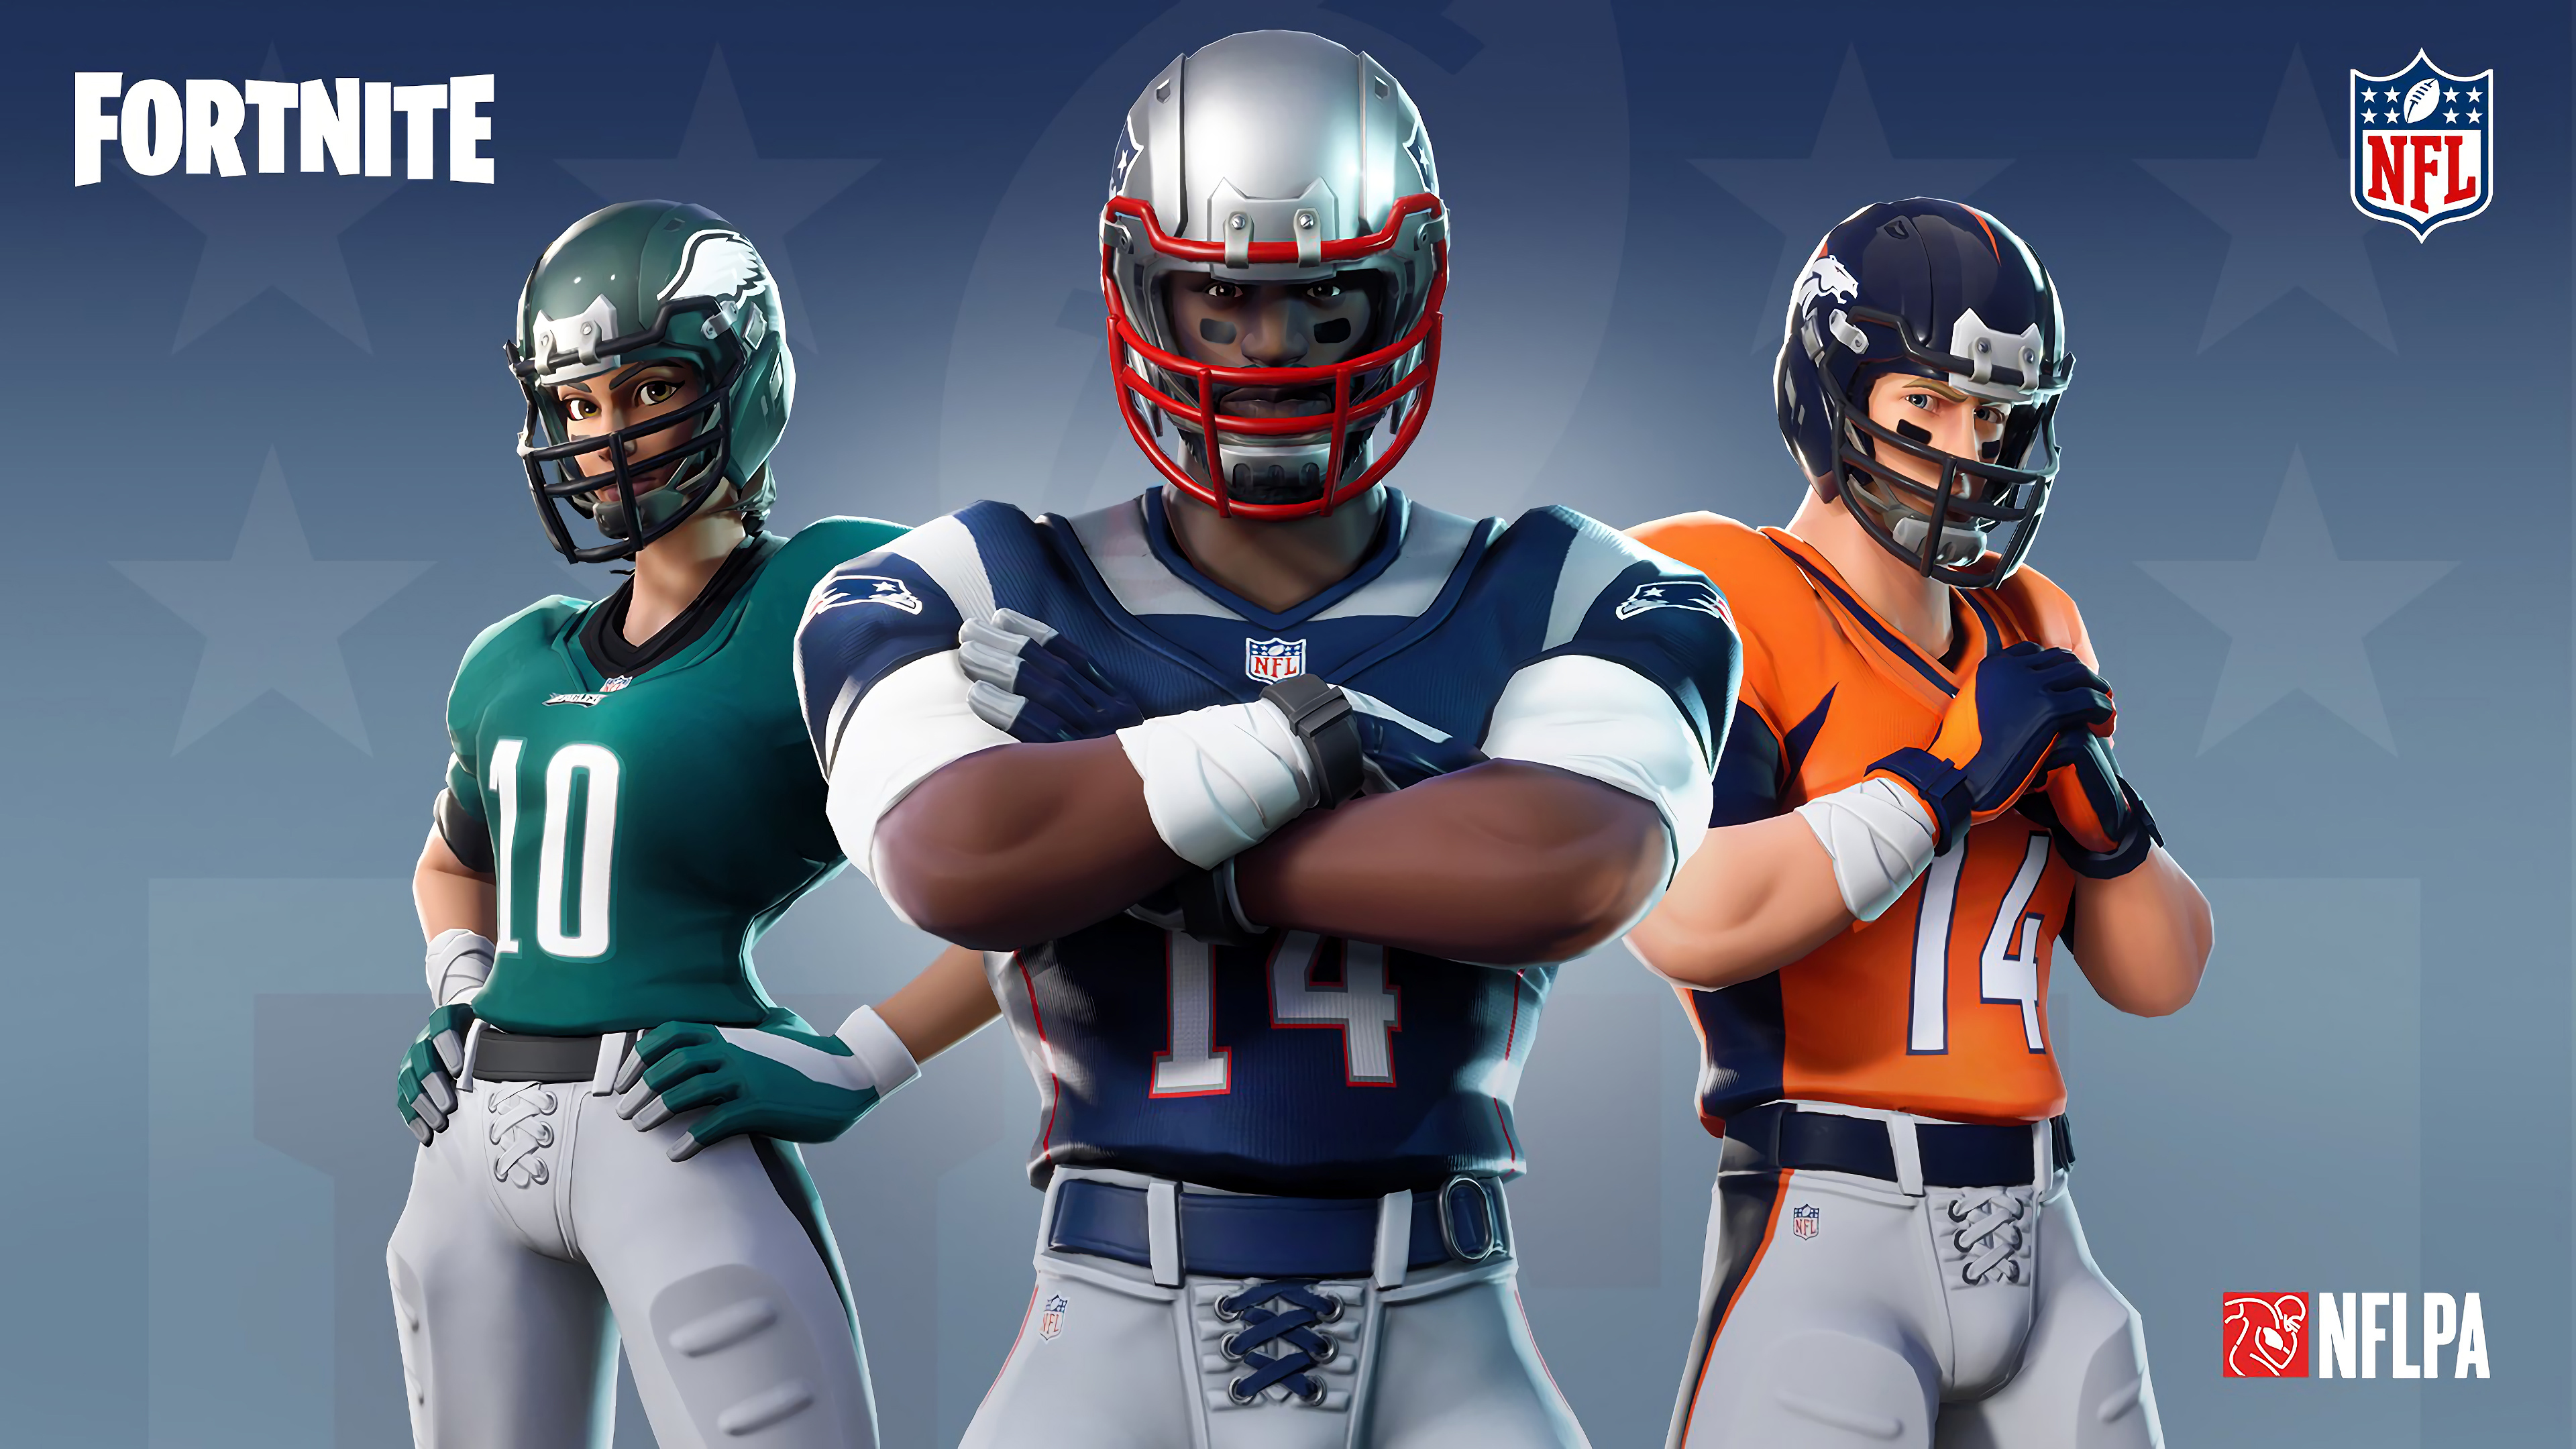 Nfl Fortnite Battle Royale 2018 4K, HD Games, 4k Wallpapers, Images,  Backgrounds, Photos and Pictures